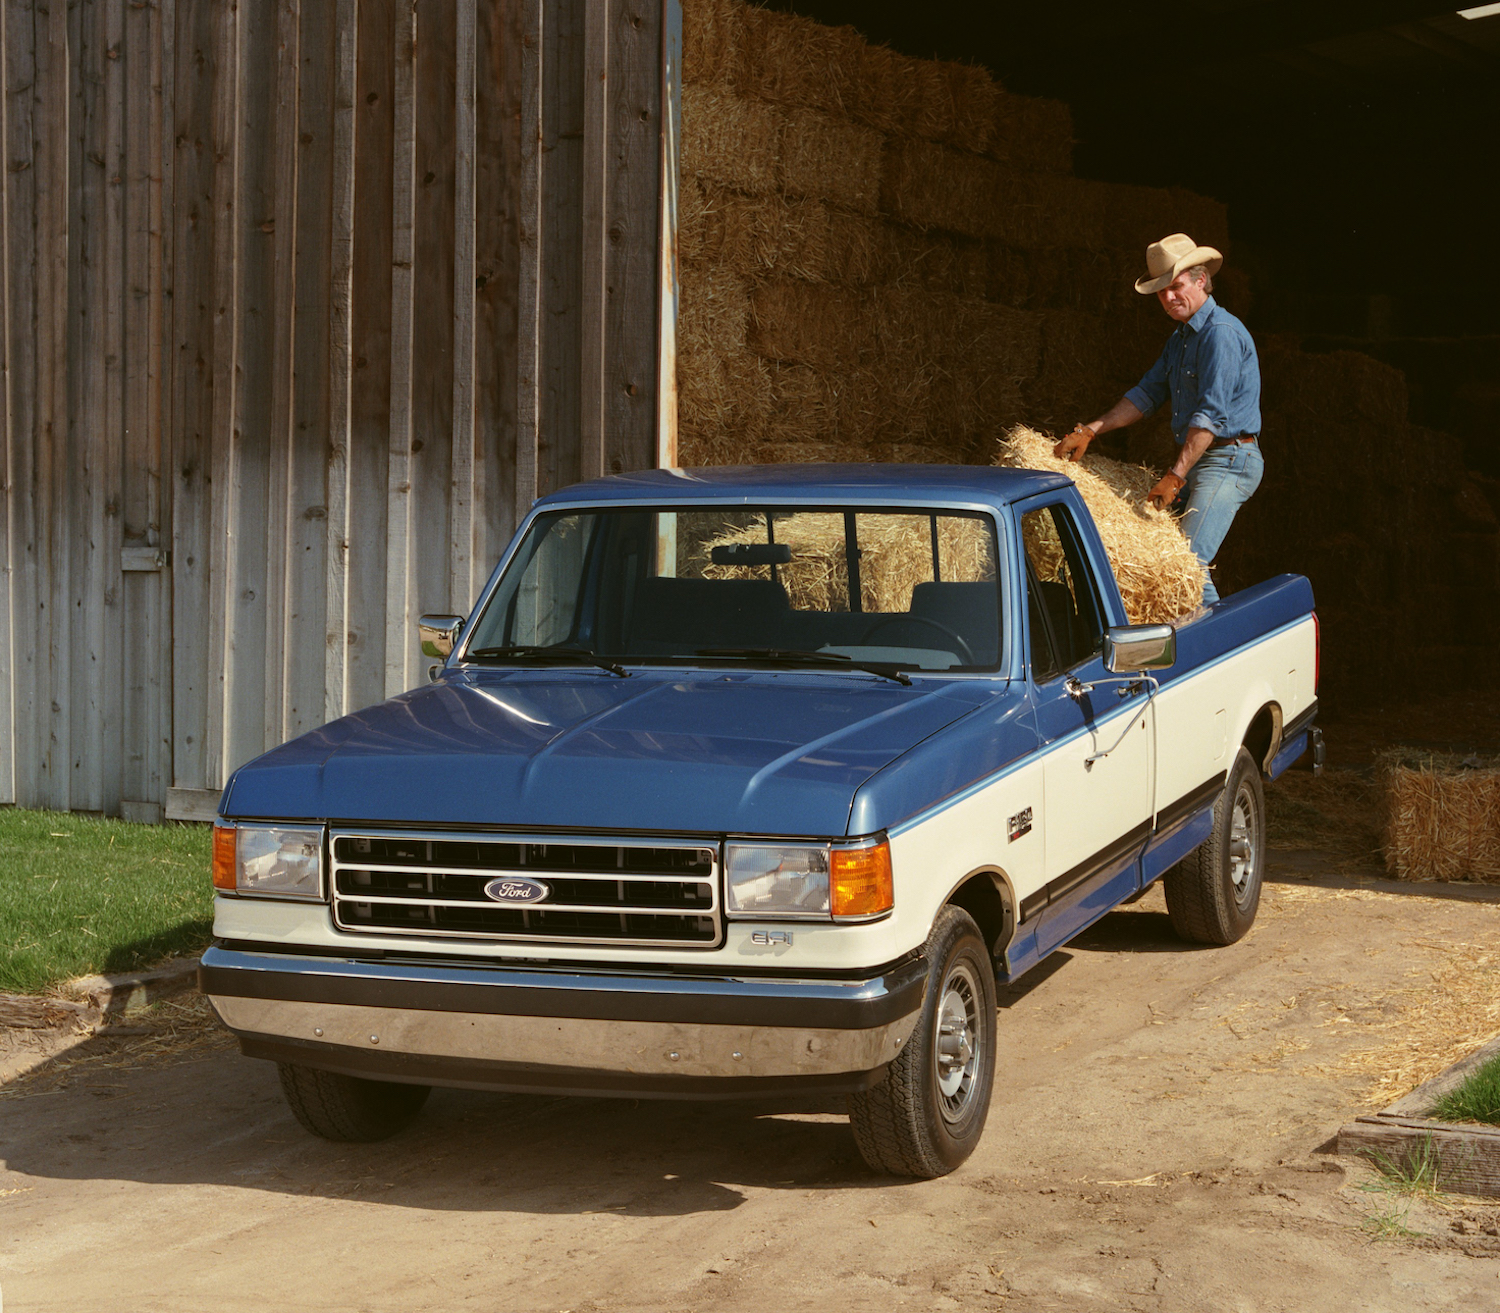 A two-tone blue and white square-body Ford pickup truck loaded with bales of hay, an open barn door visible in the background.